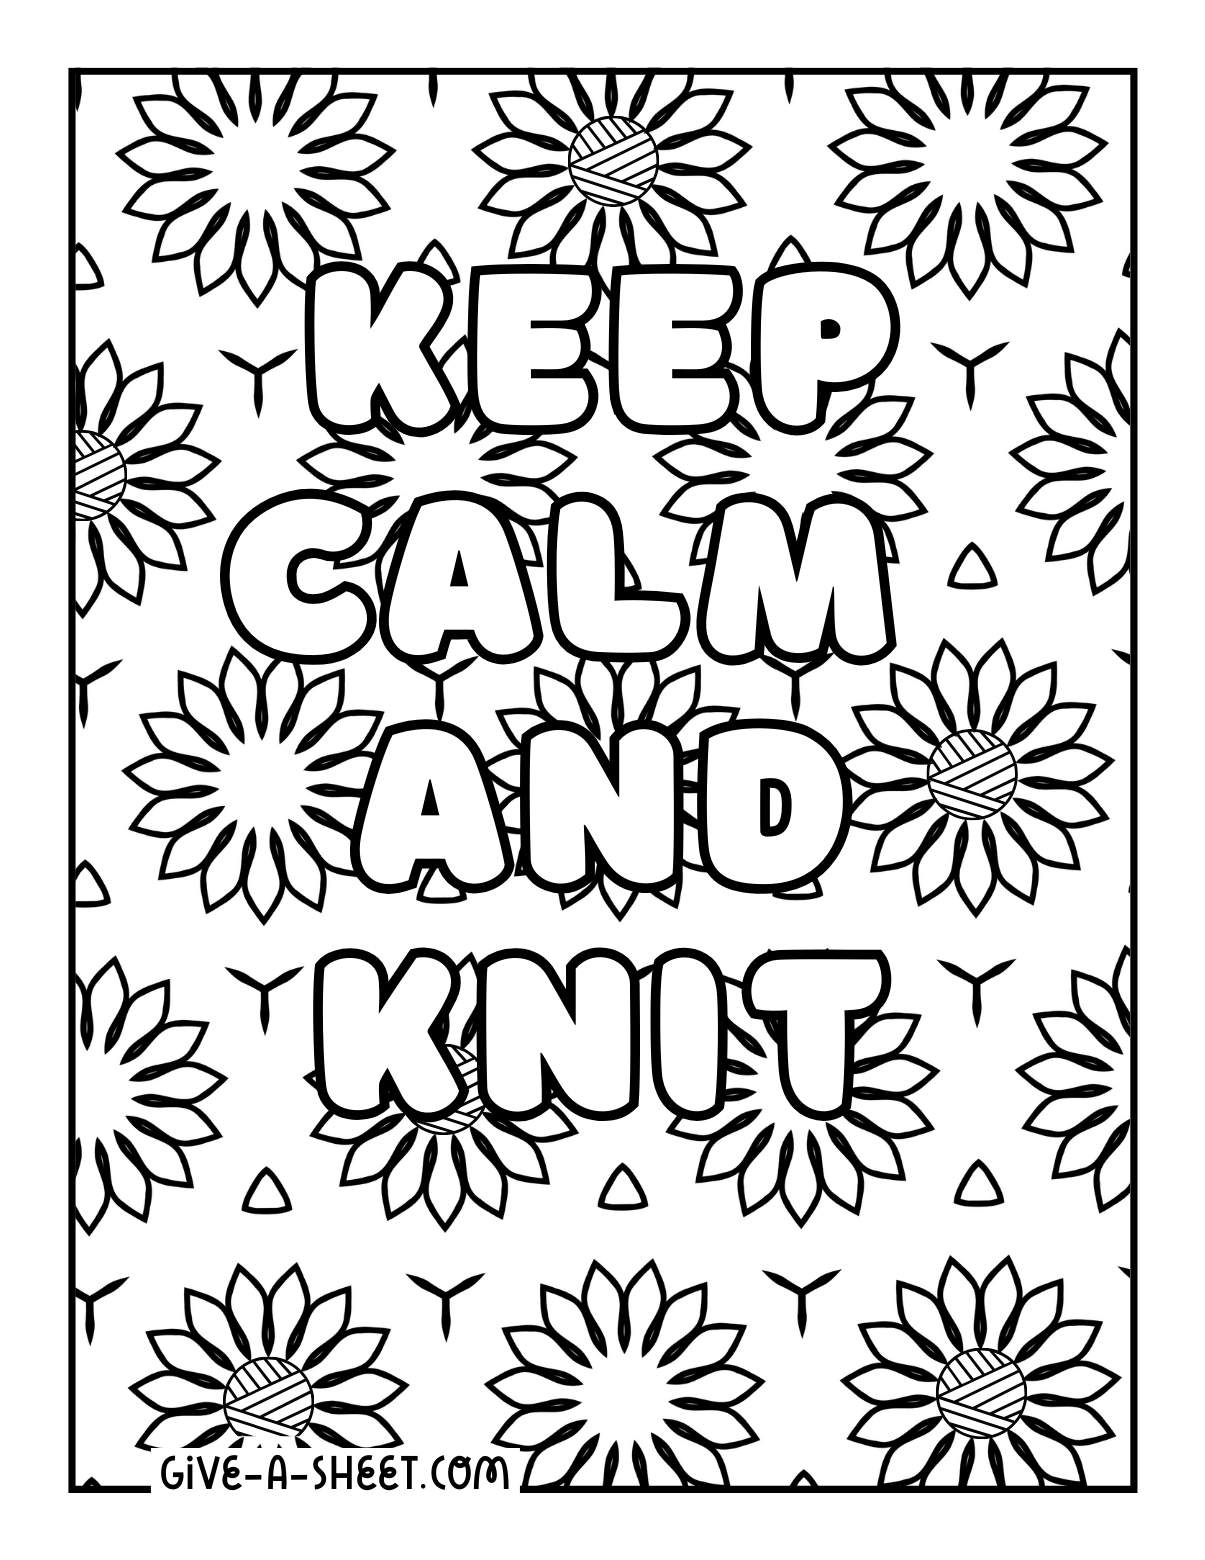 Knitting design coloring page for adults.